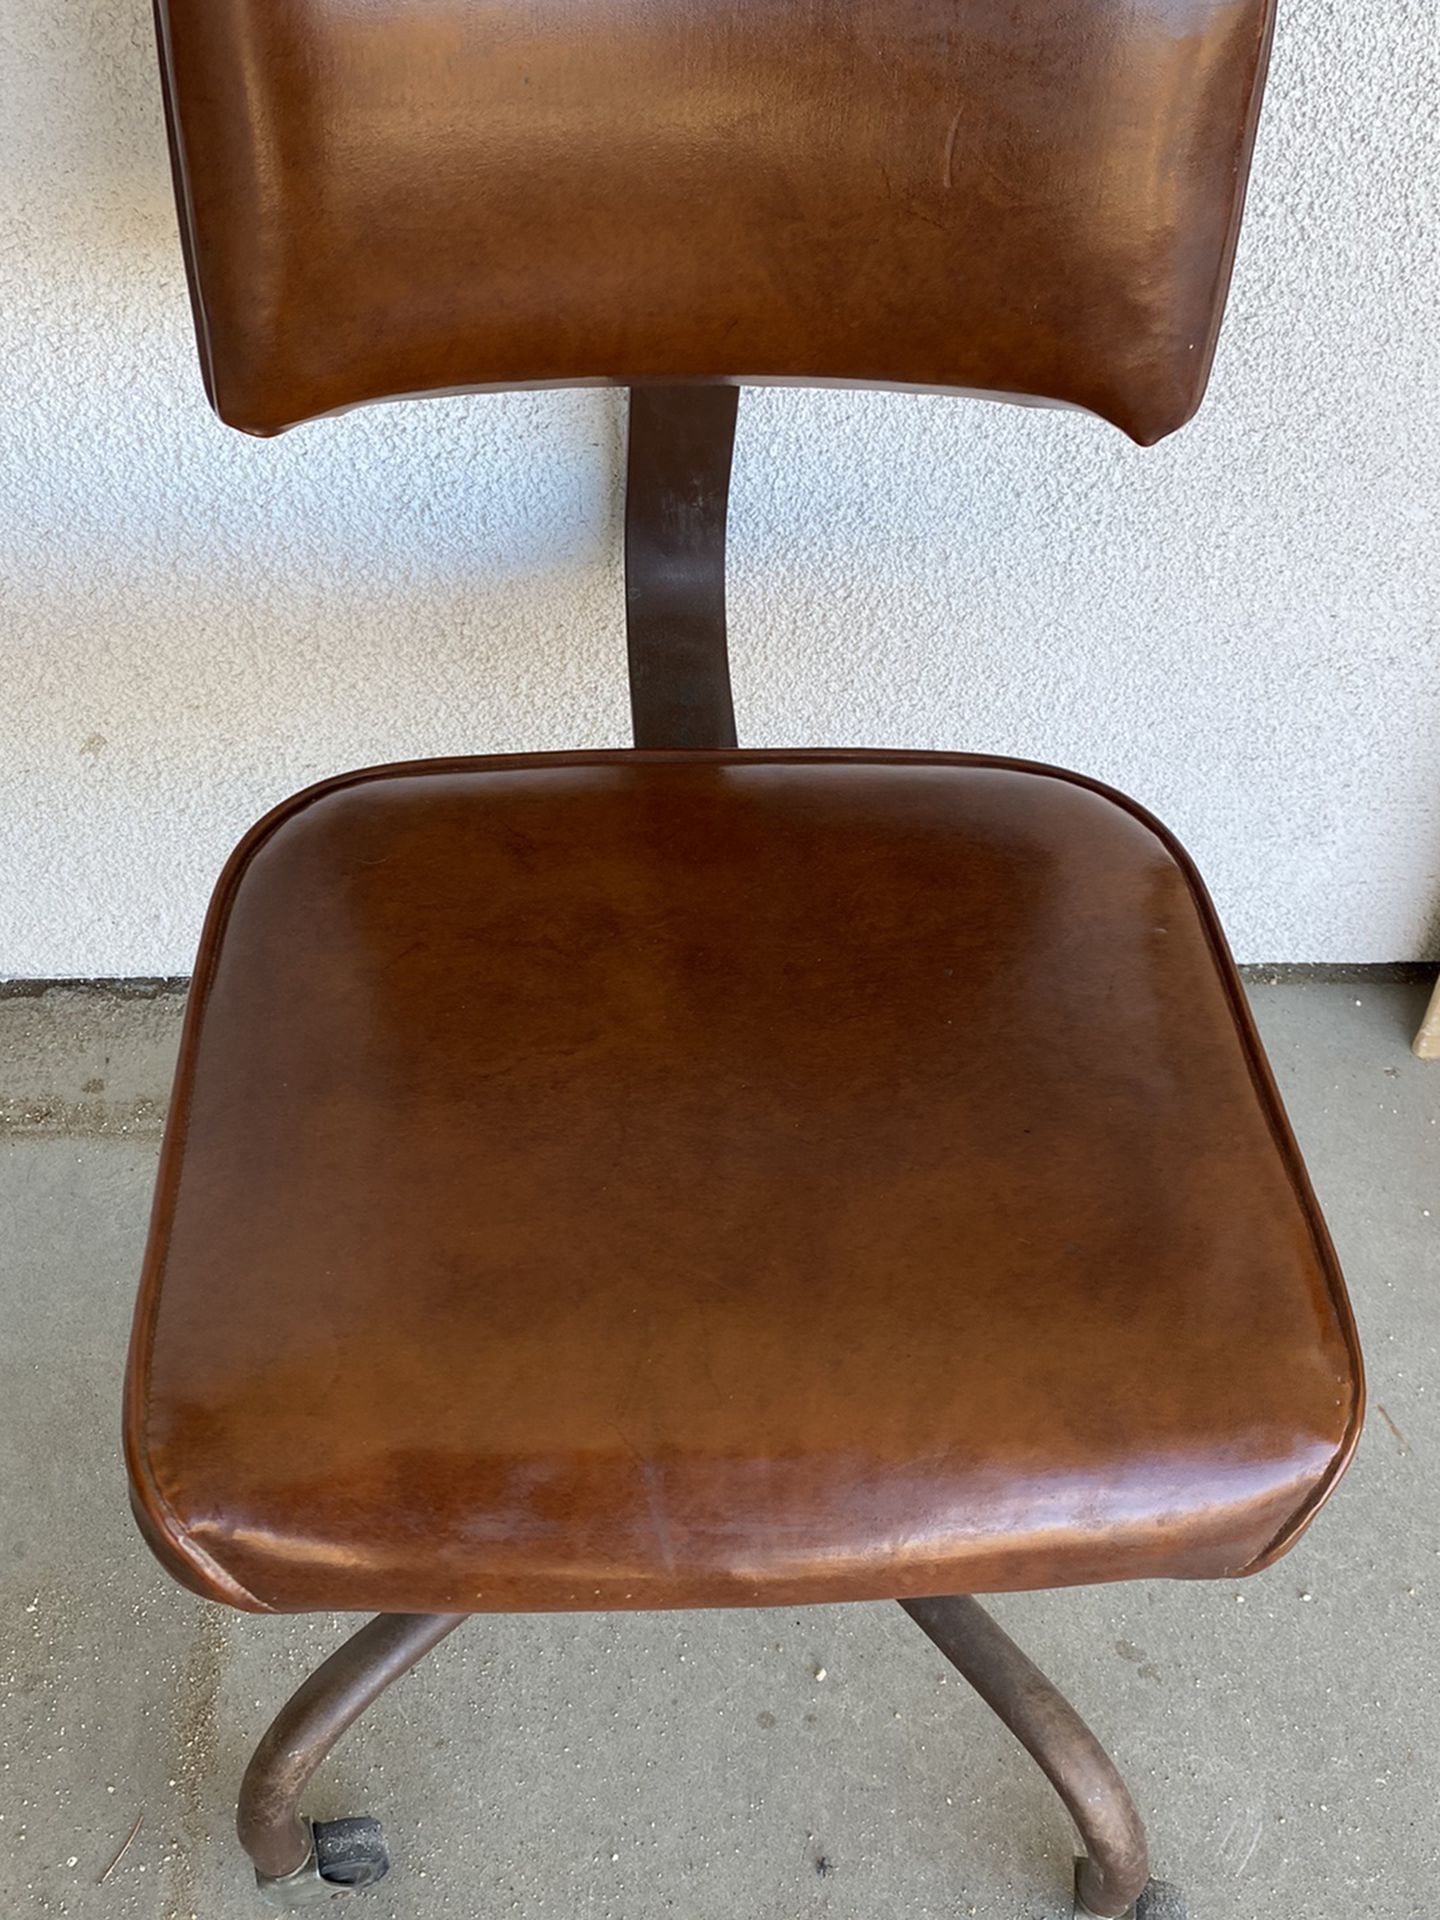 Vintage mid century rolling chair